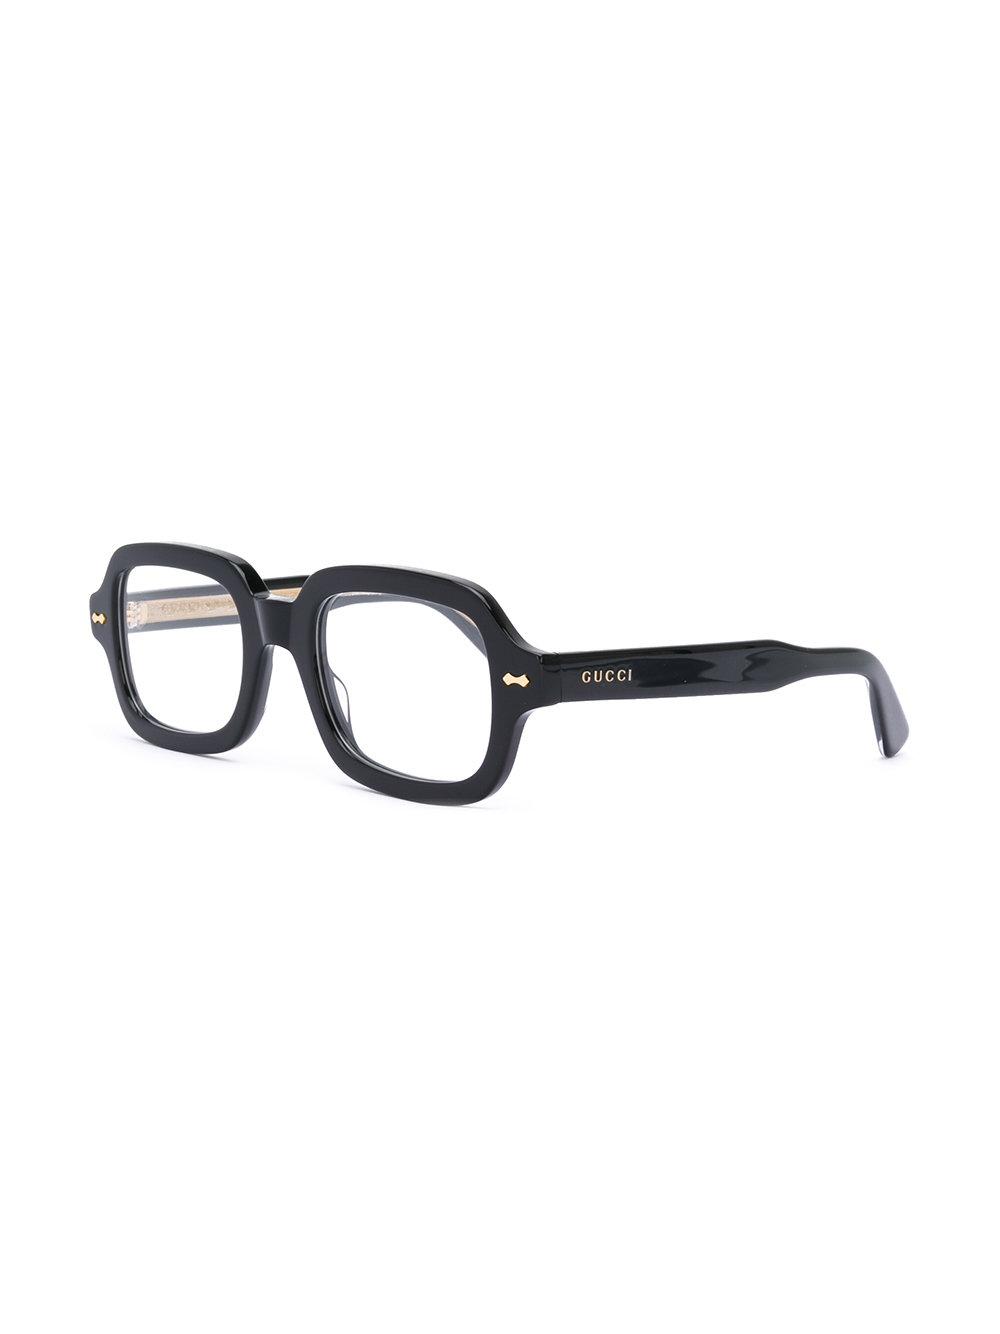 Gucci Thick Rimmed Glasses in Black - Lyst